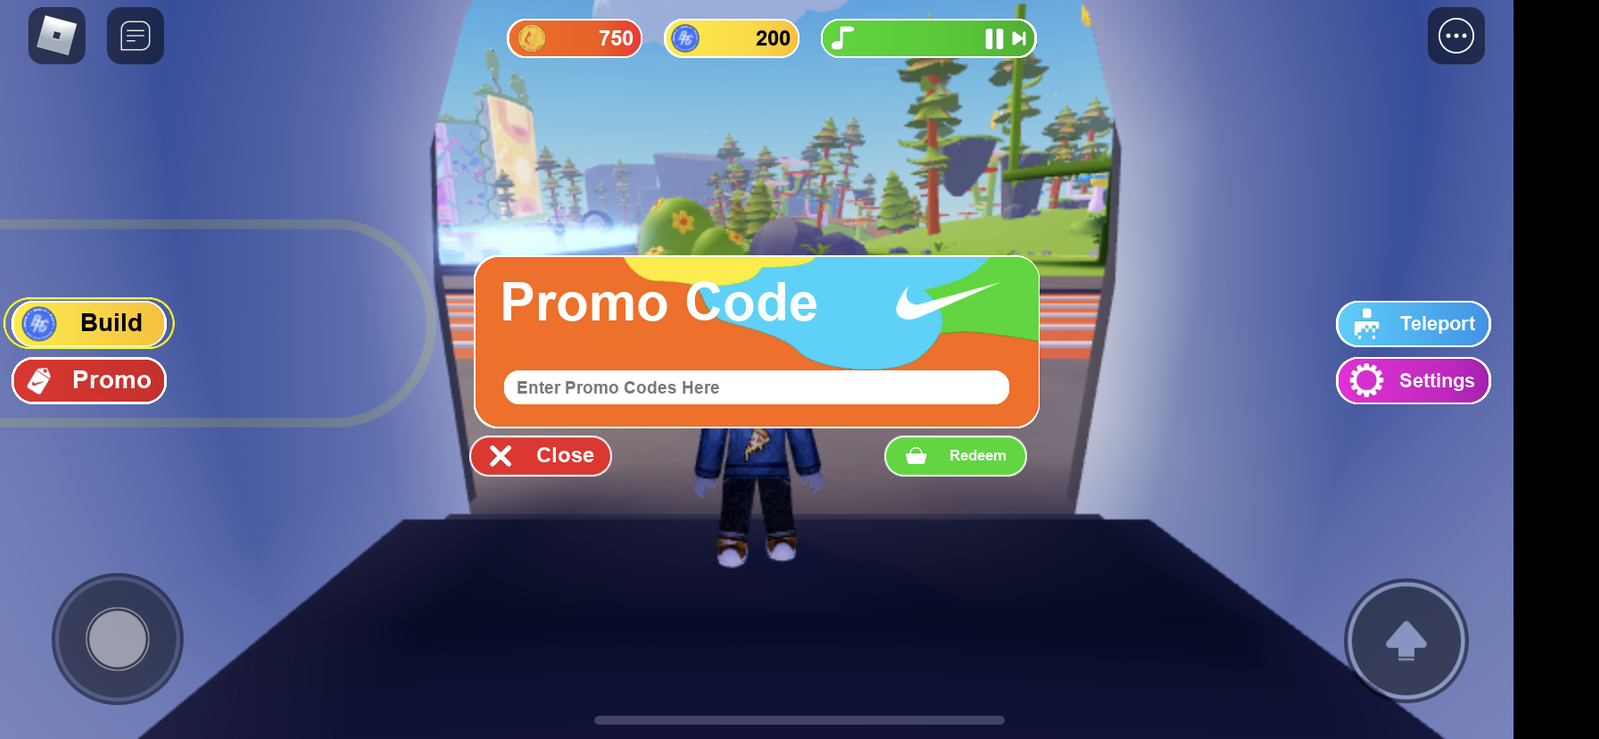 Screenshot from Nikeland, showing the code redemption screen with a text box and a Redeem button